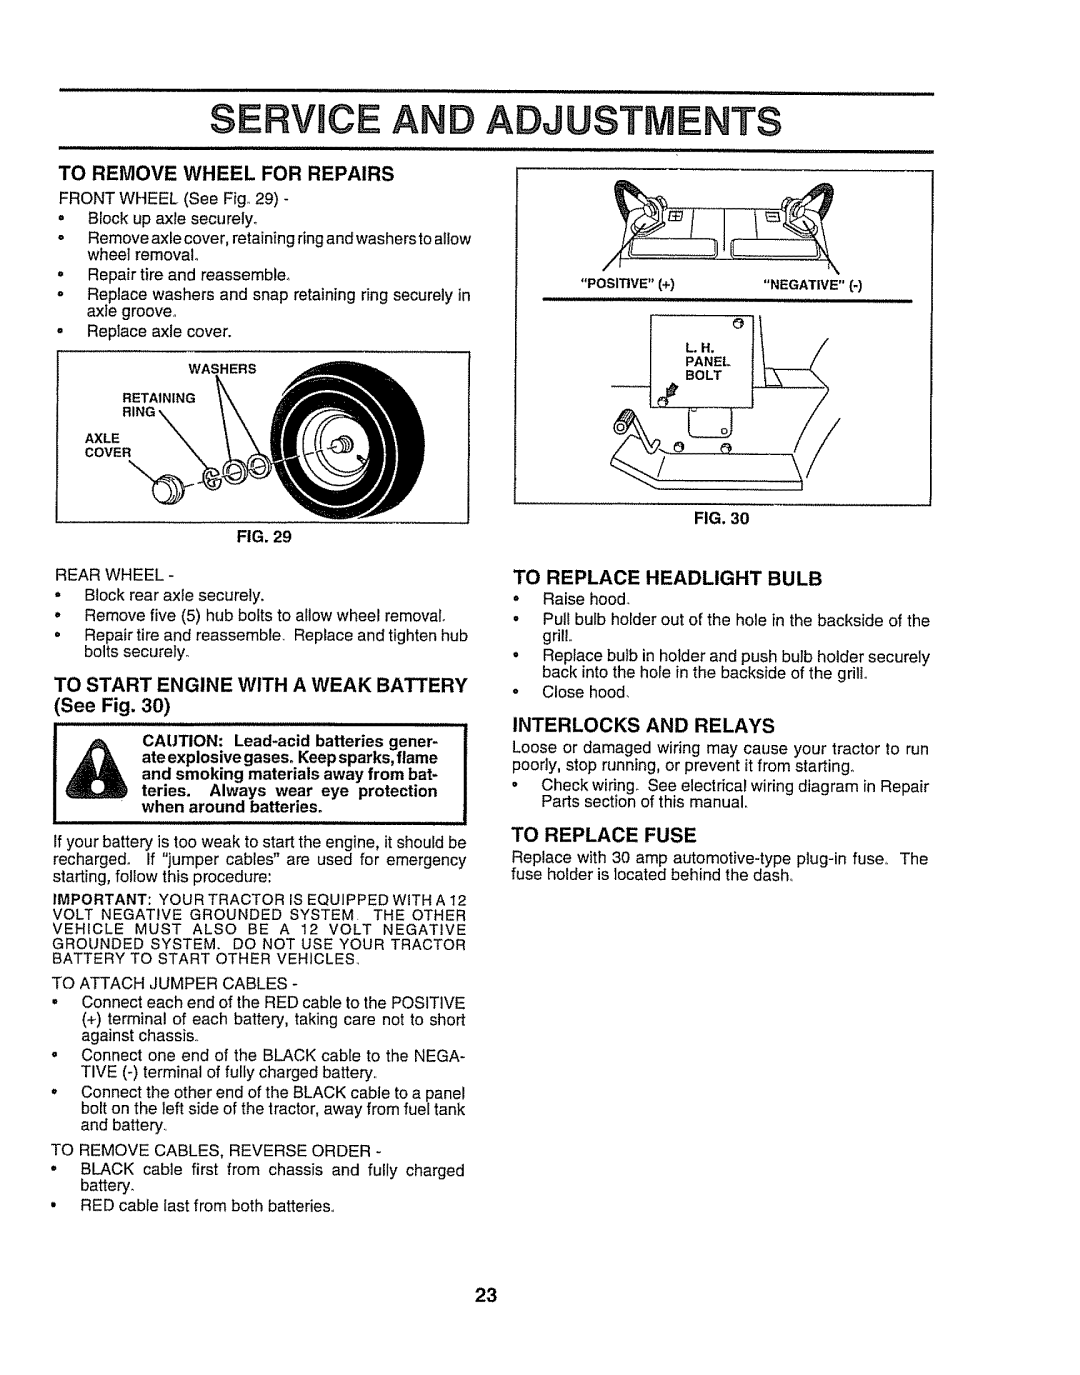 Craftsman 917O251550 To Remove Wheel For Repairs, Interlocks And Relays, To Replace Fuse, FRONT WHEEL See Fig29 